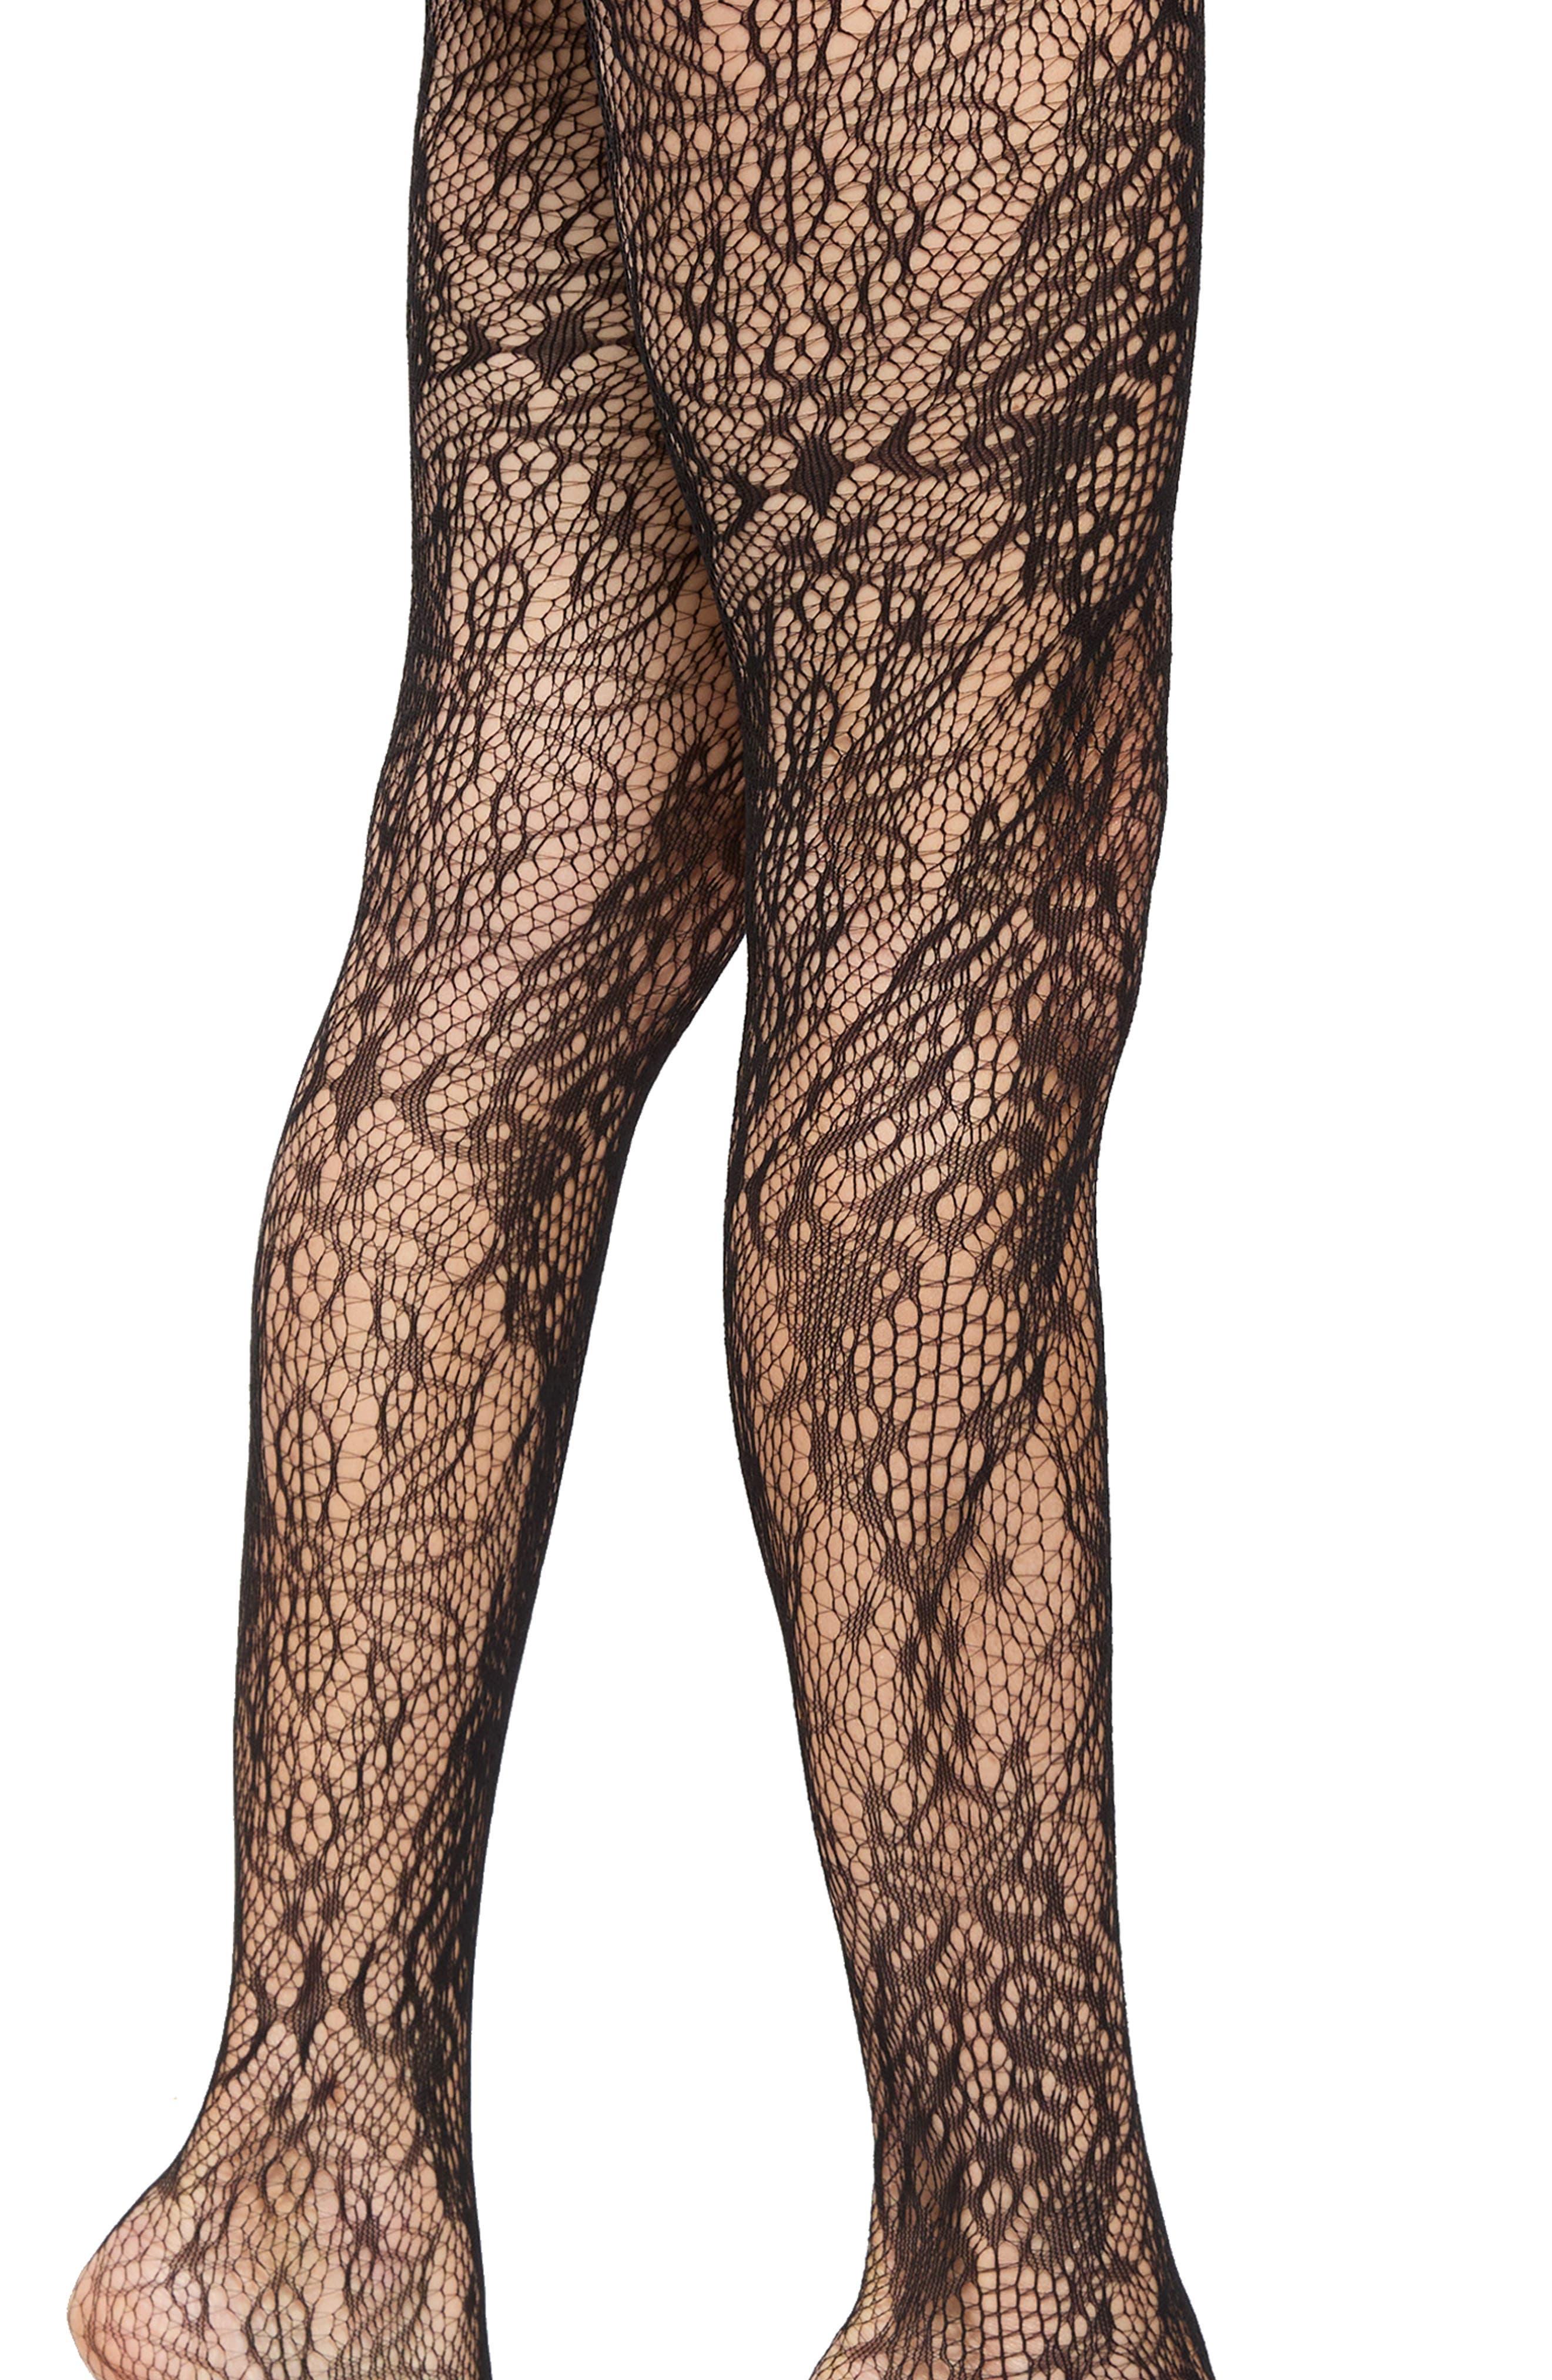 Stems Floral Vine Fishnet Tights in Natural | Lyst